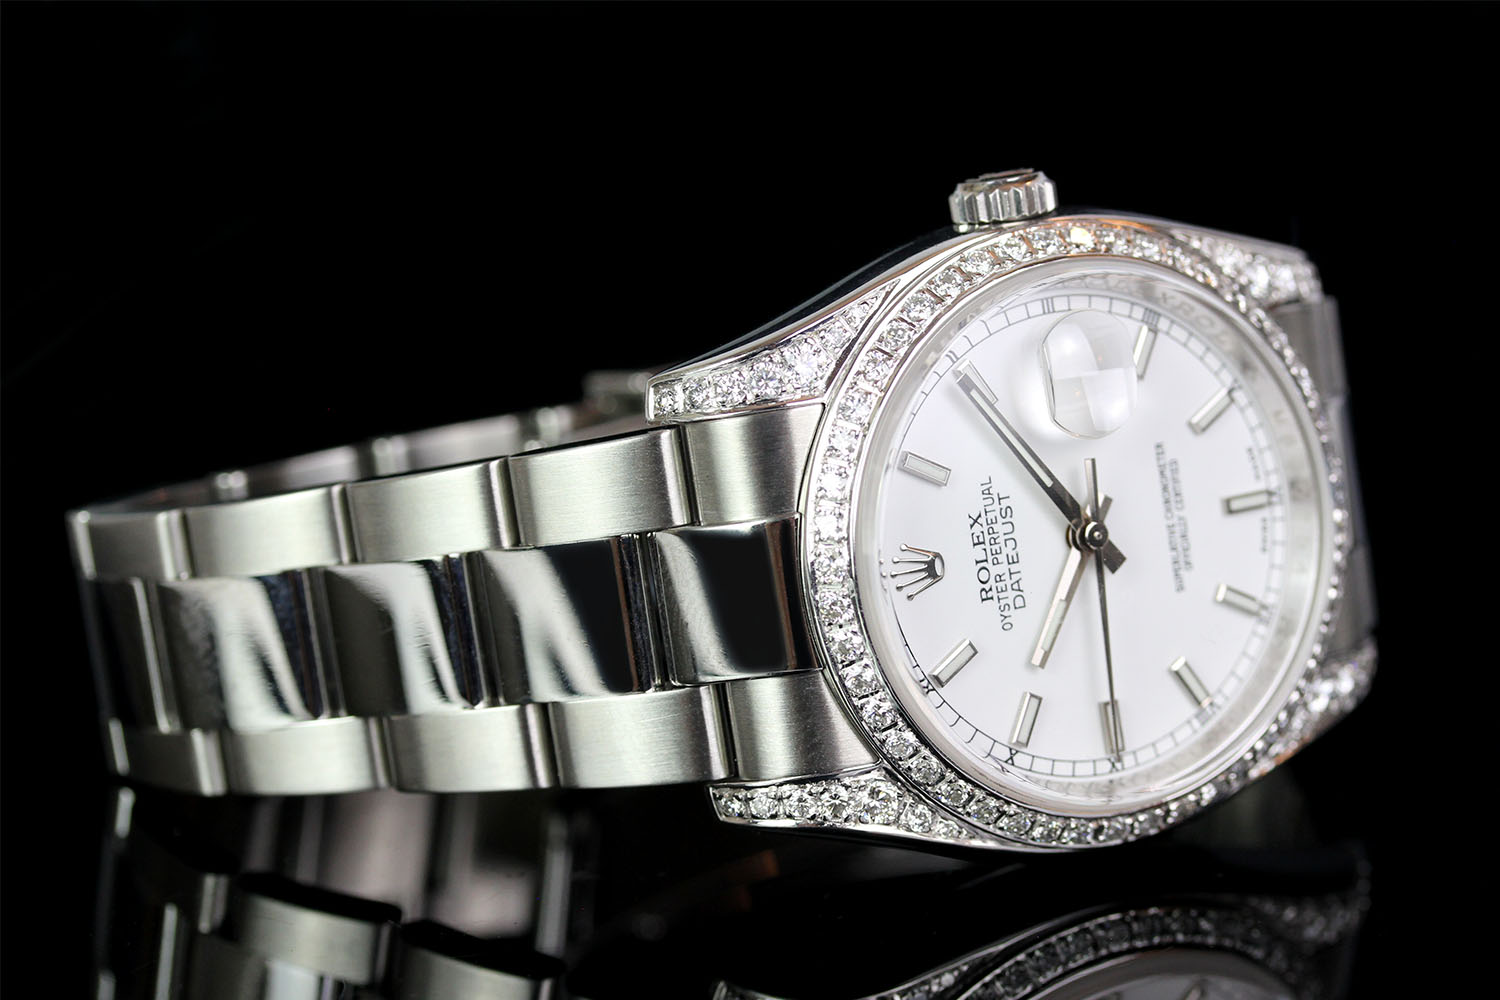 GENTLEMANS ROLEX OYSTER PERPETUAL DATEJUST MODEL 116200, SN M84....,DIAMOND SET BEZEL AND - Image 2 of 5